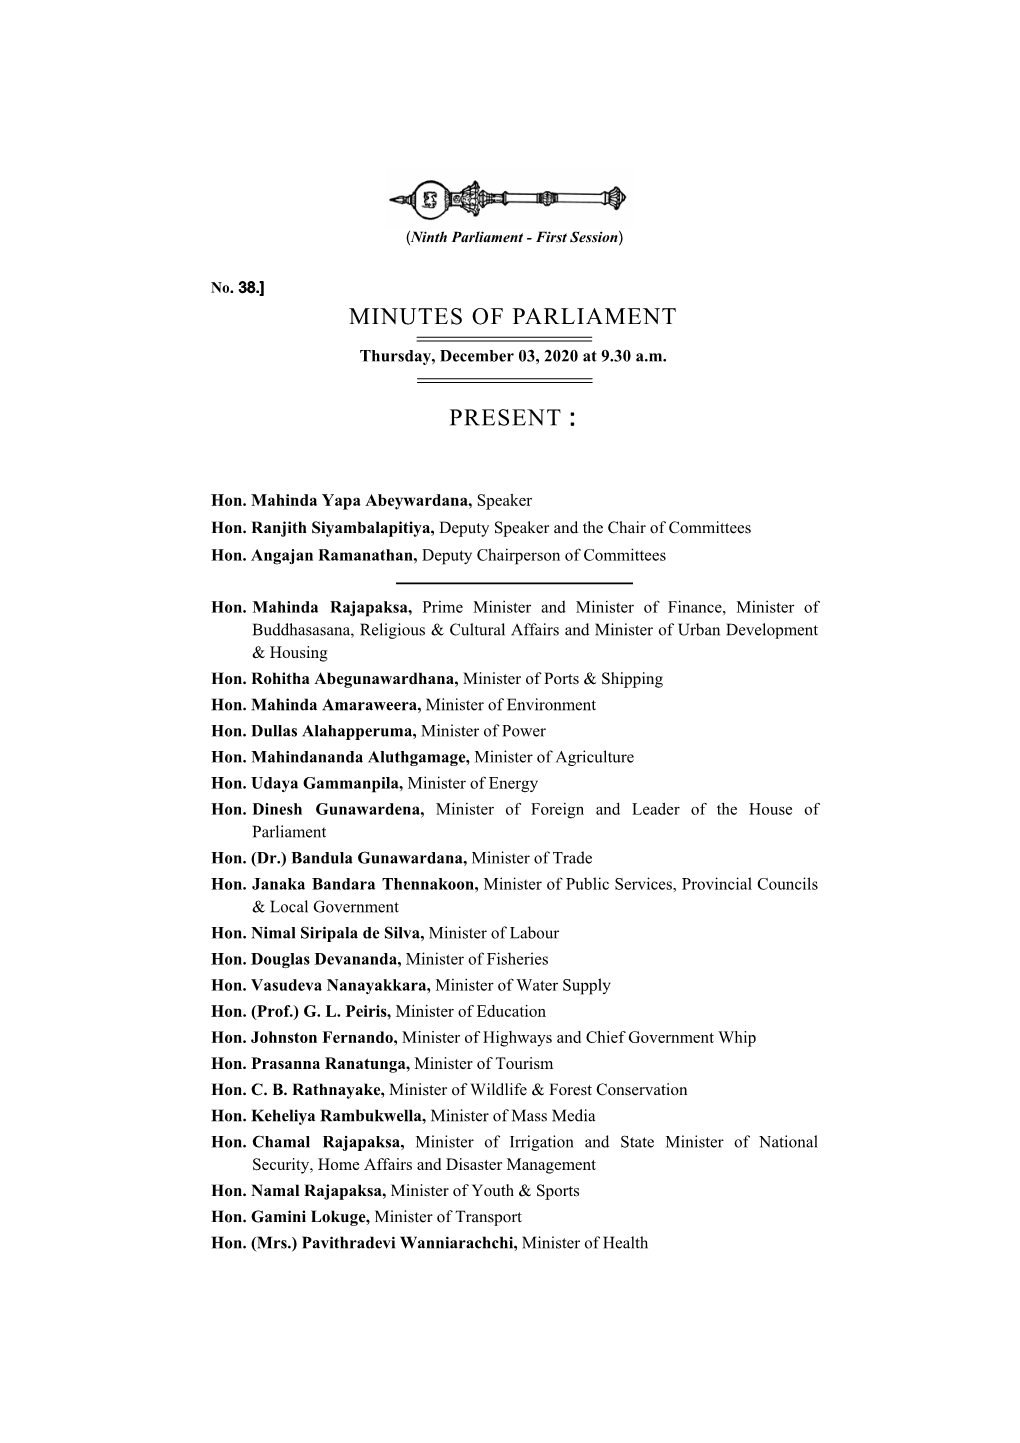 Minutes of Parliament for 03.12.2020